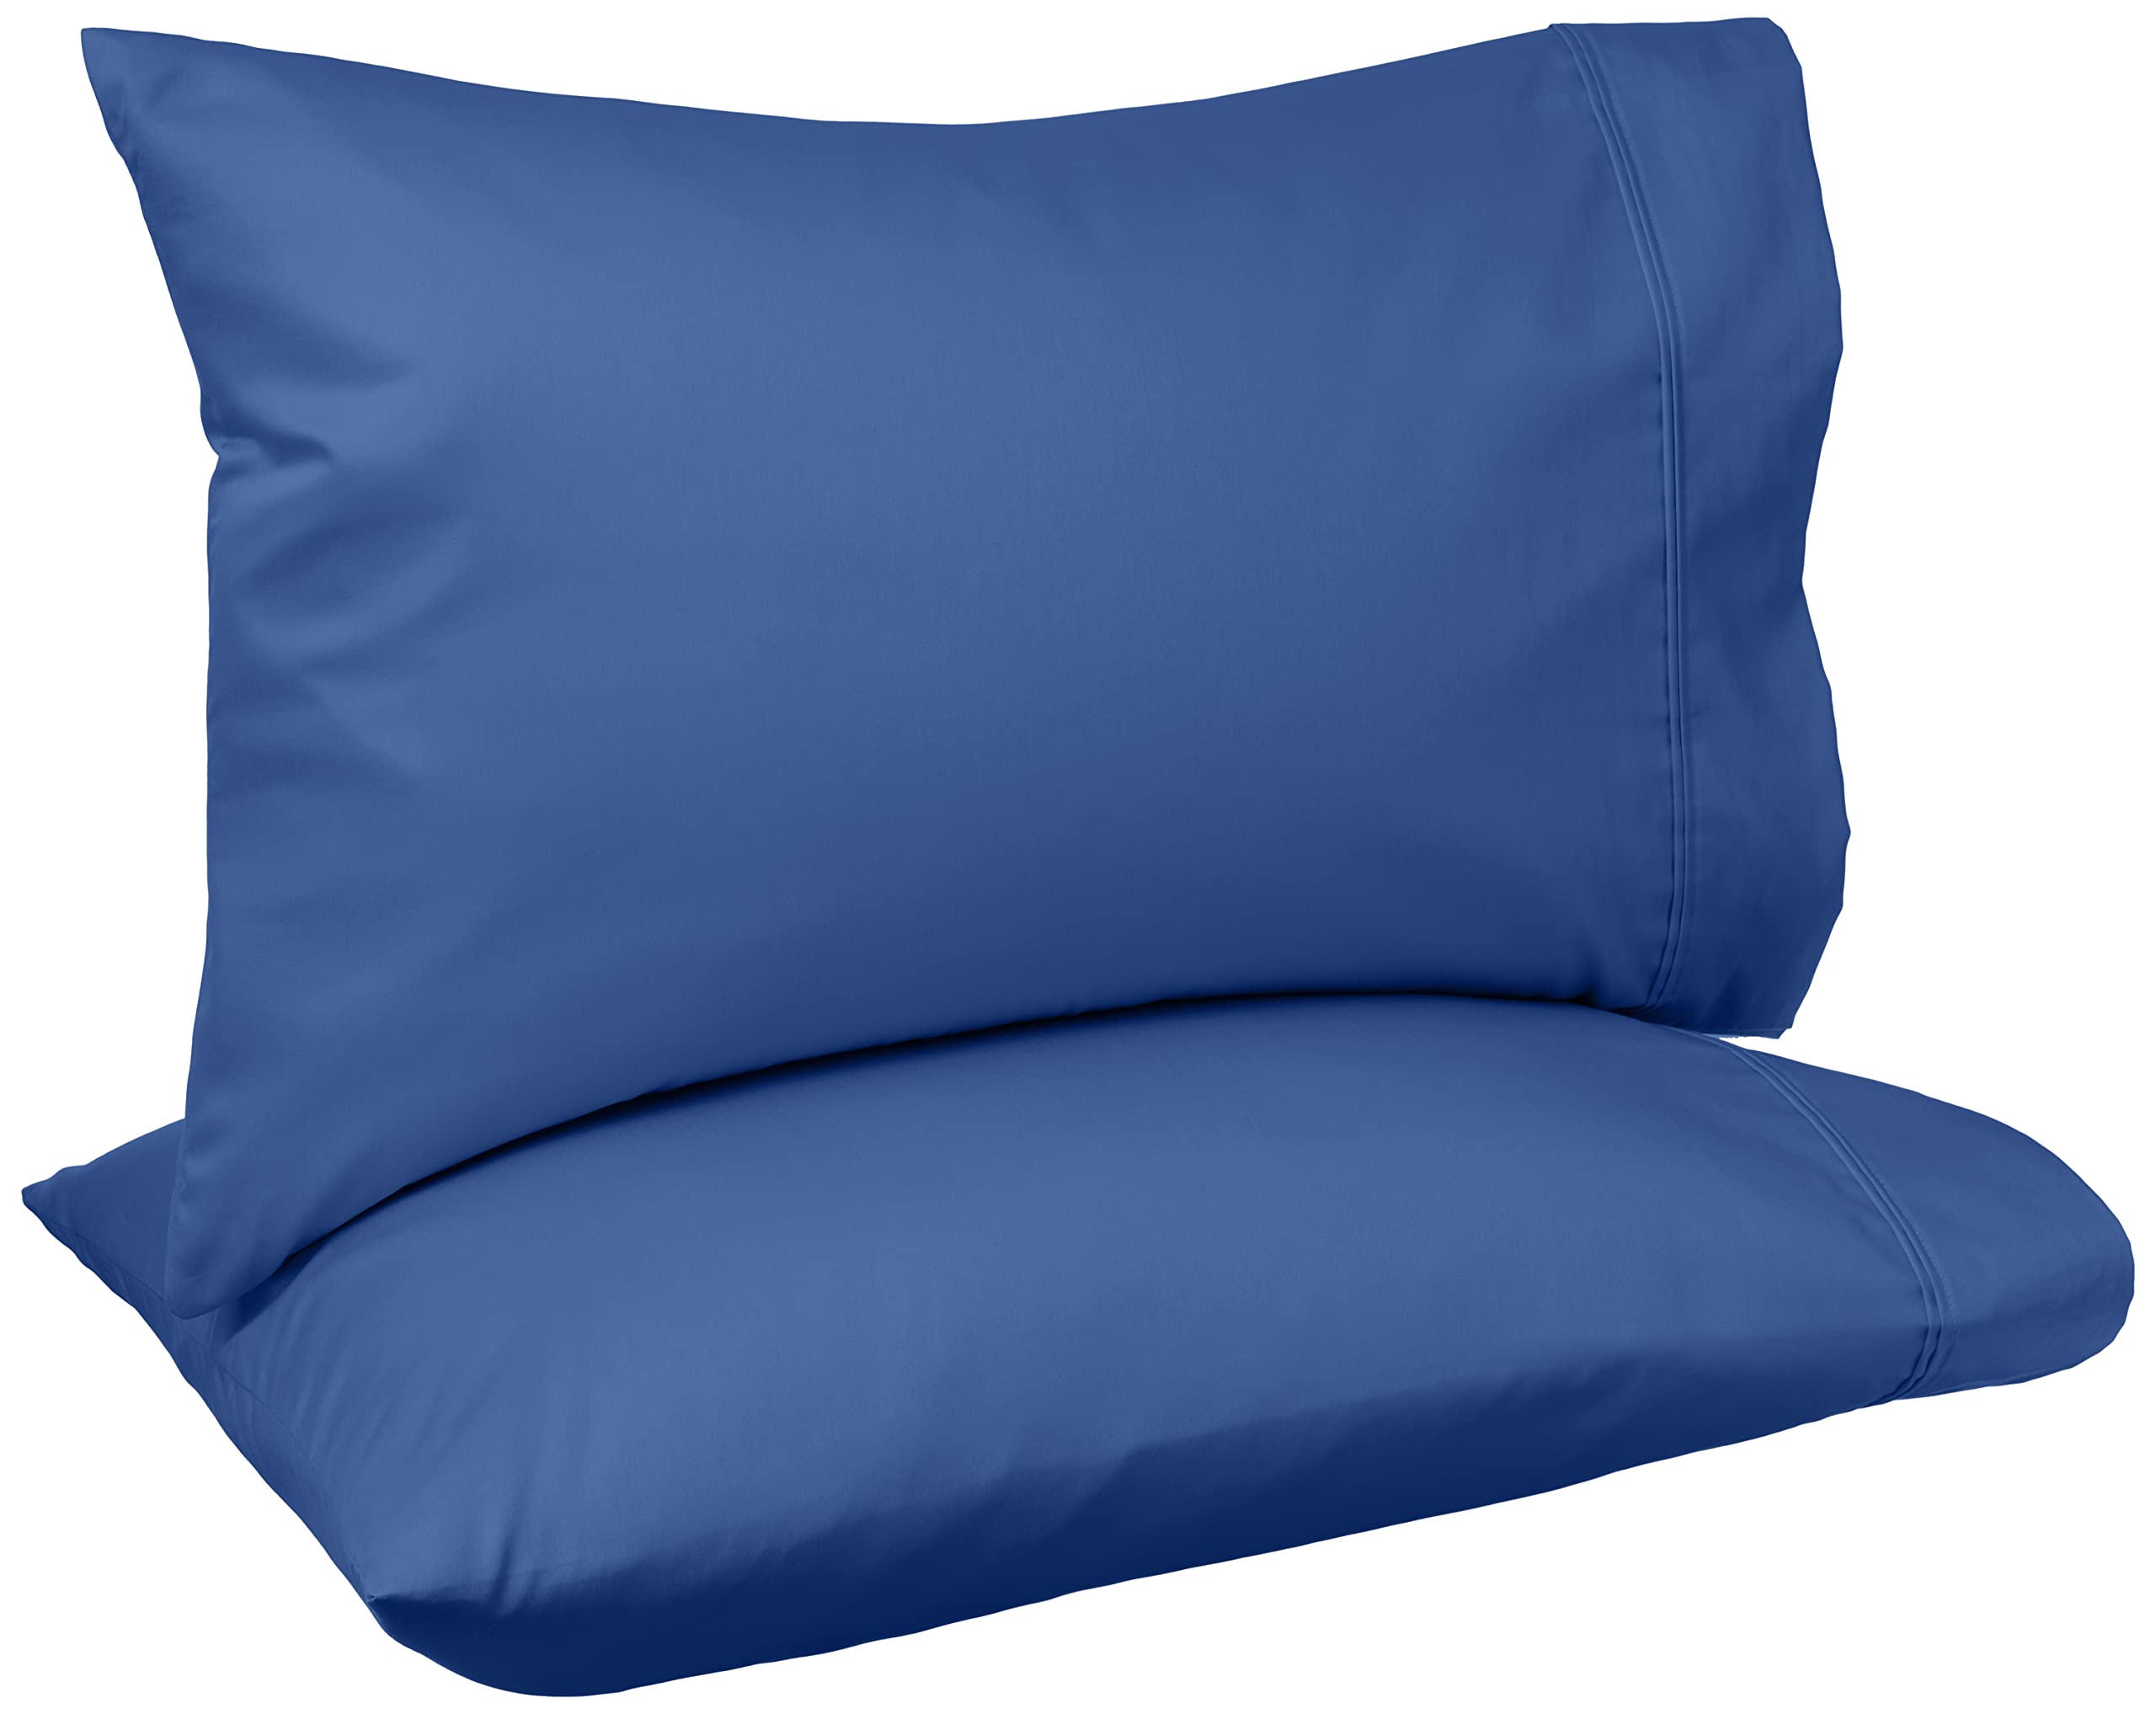 Book Cover Amazon Basics 400 Thread Count Pillow Cases - Standard, Navy